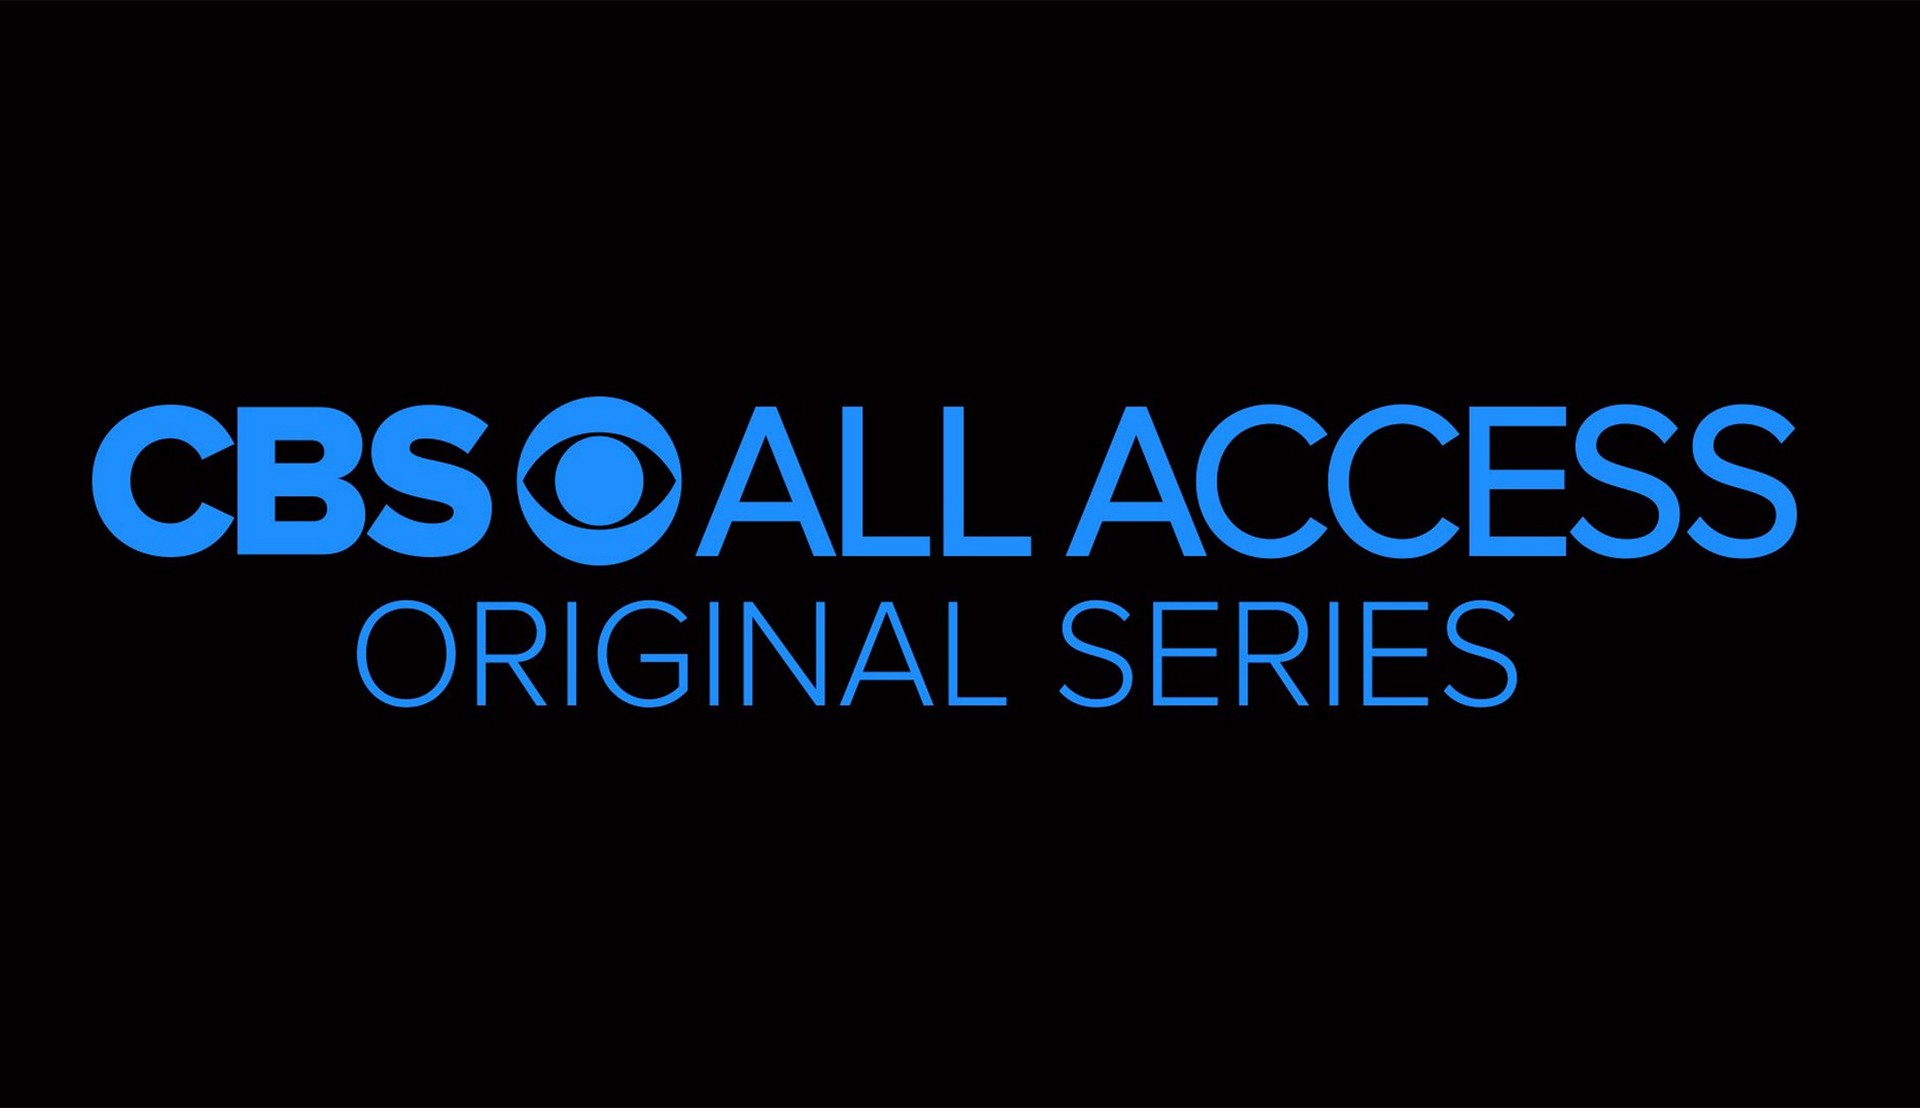 How much is it to subscribe to cbs all access Cbs All Access Getting Summer Upgrade Ahead Of Rebranding Paramount Movies And More Being Added Trekmovie Com